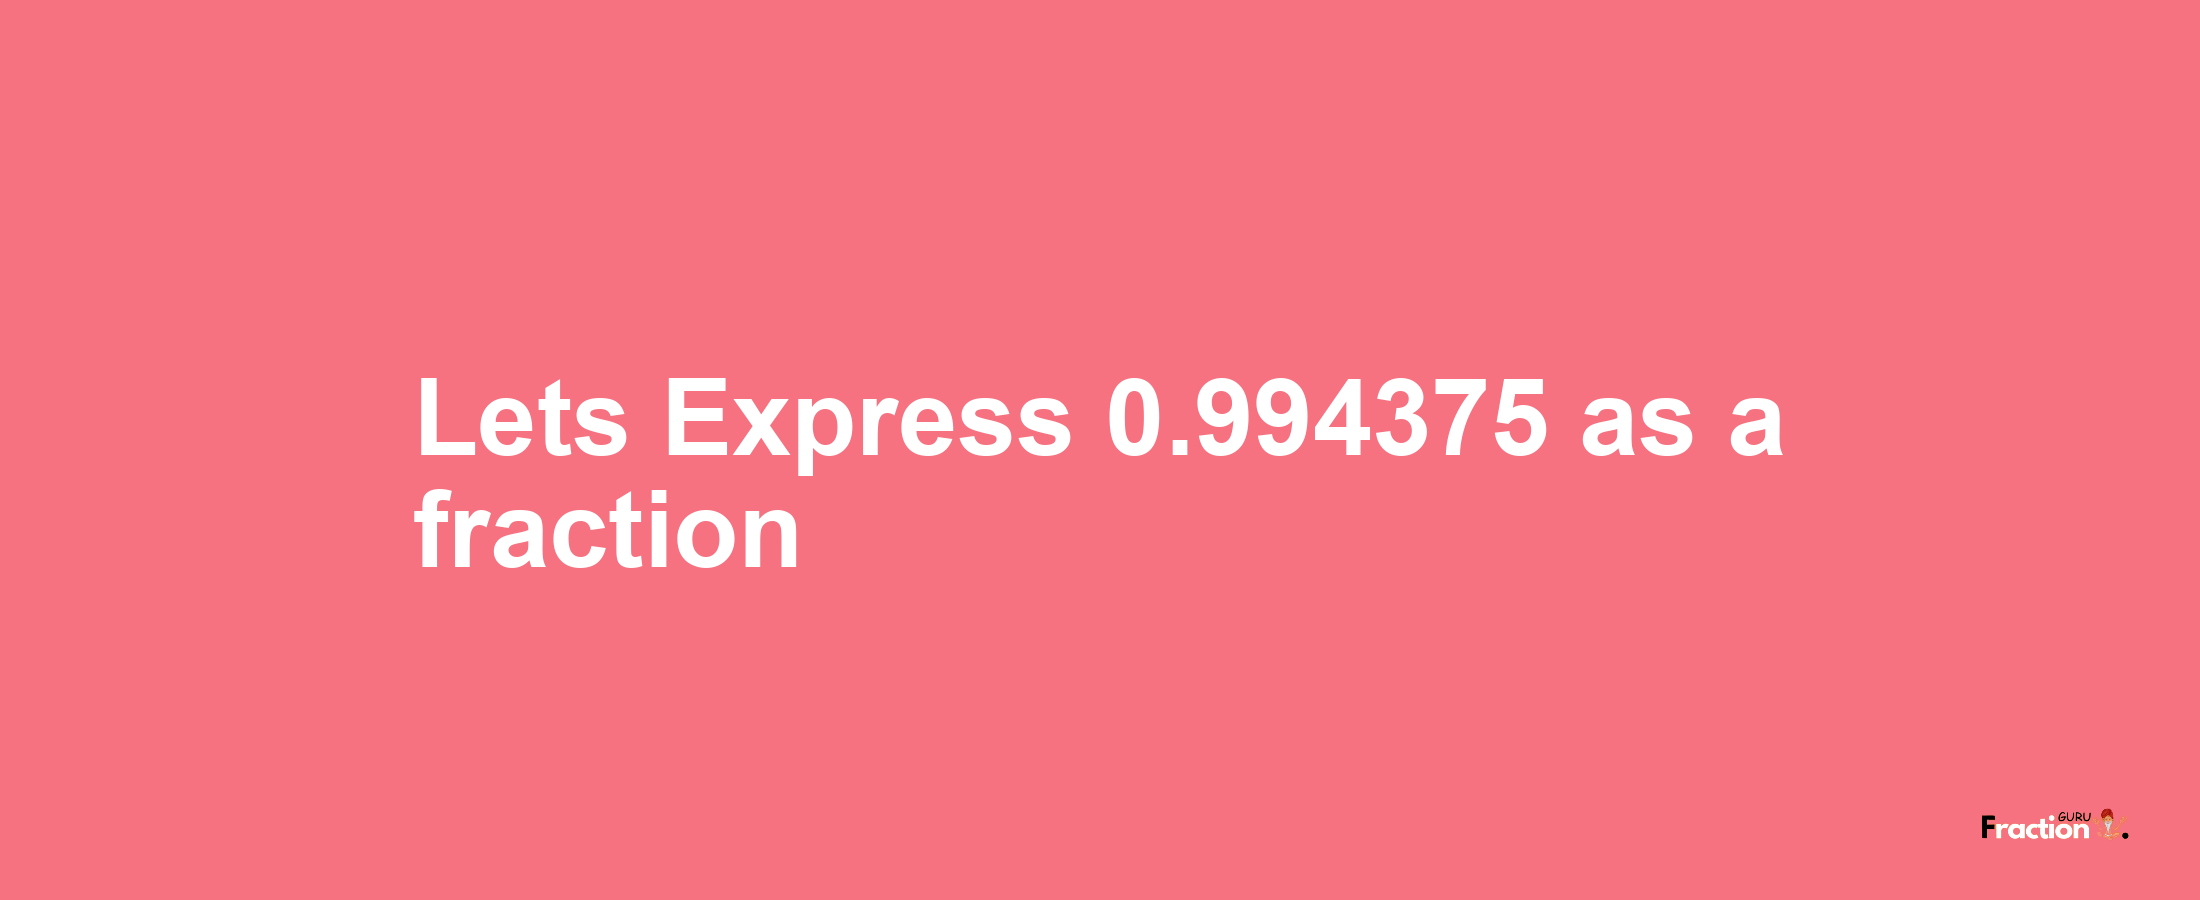 Lets Express 0.994375 as afraction